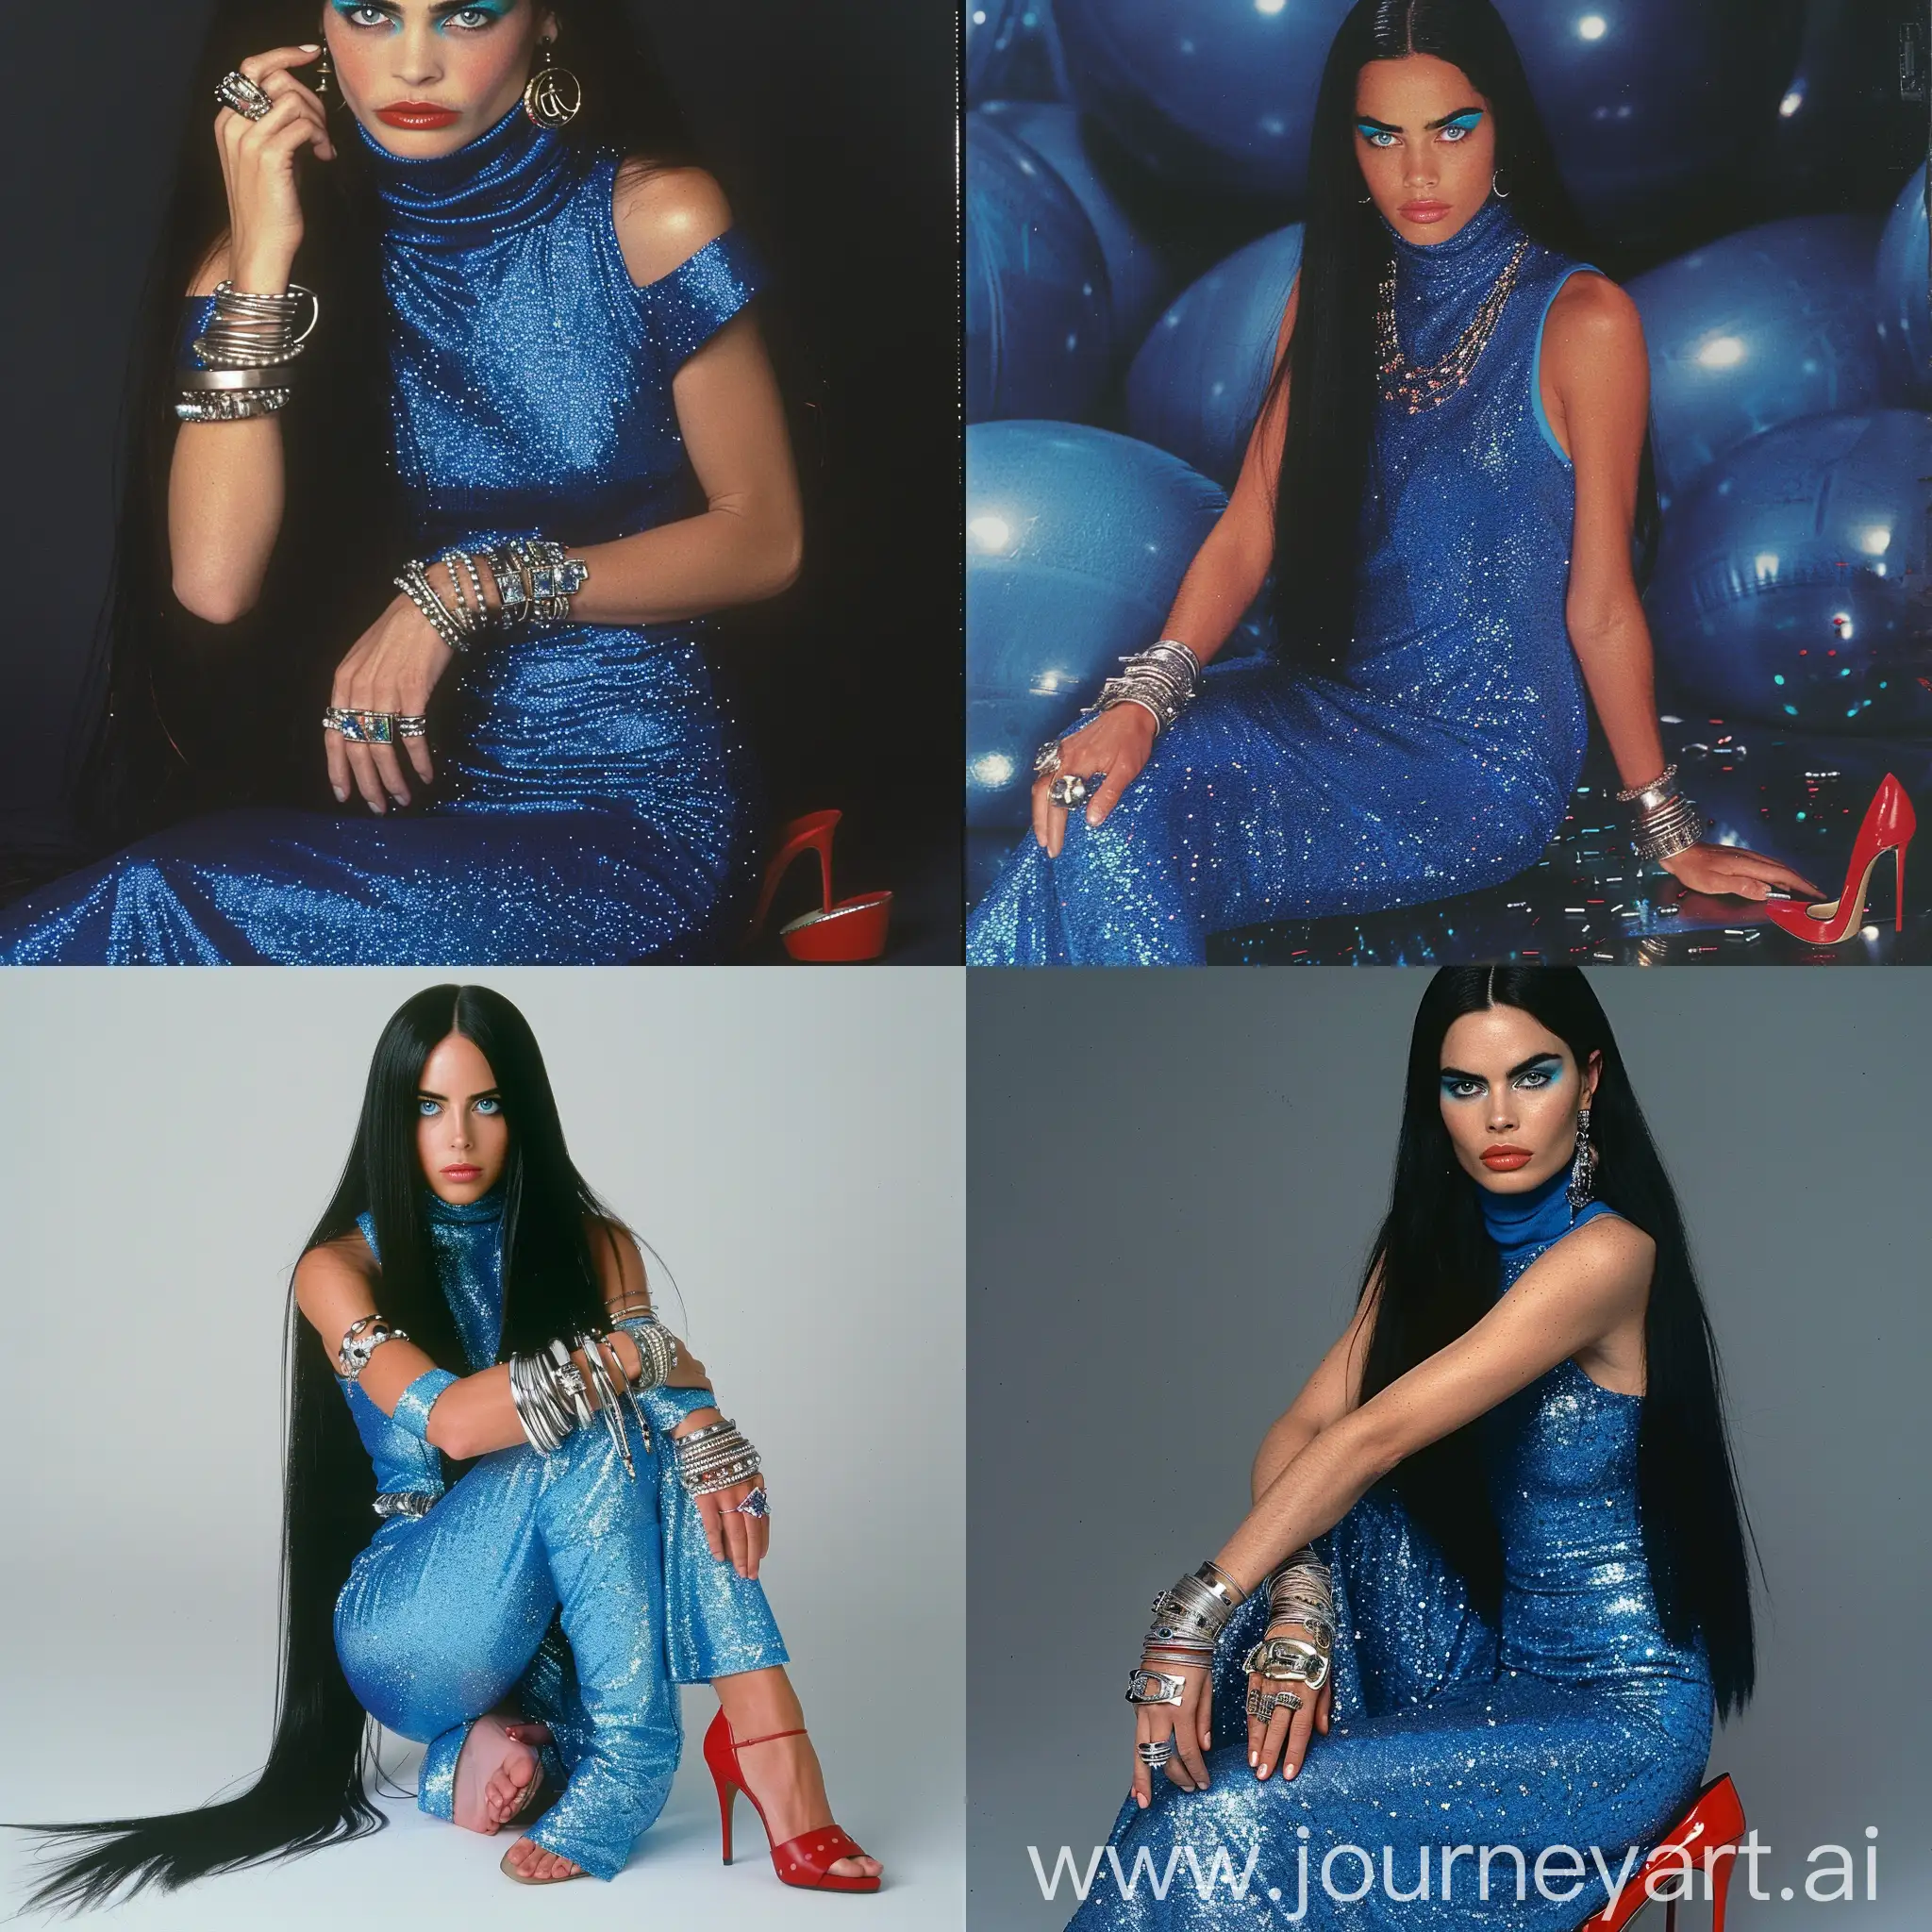 young woman with long black hair blue eyes aqua thick eyebrow wearing a blue sleeveless turtleneck glitter dress with several silver rings and bracelets and red heels, dvd screenshot from 1990s movies